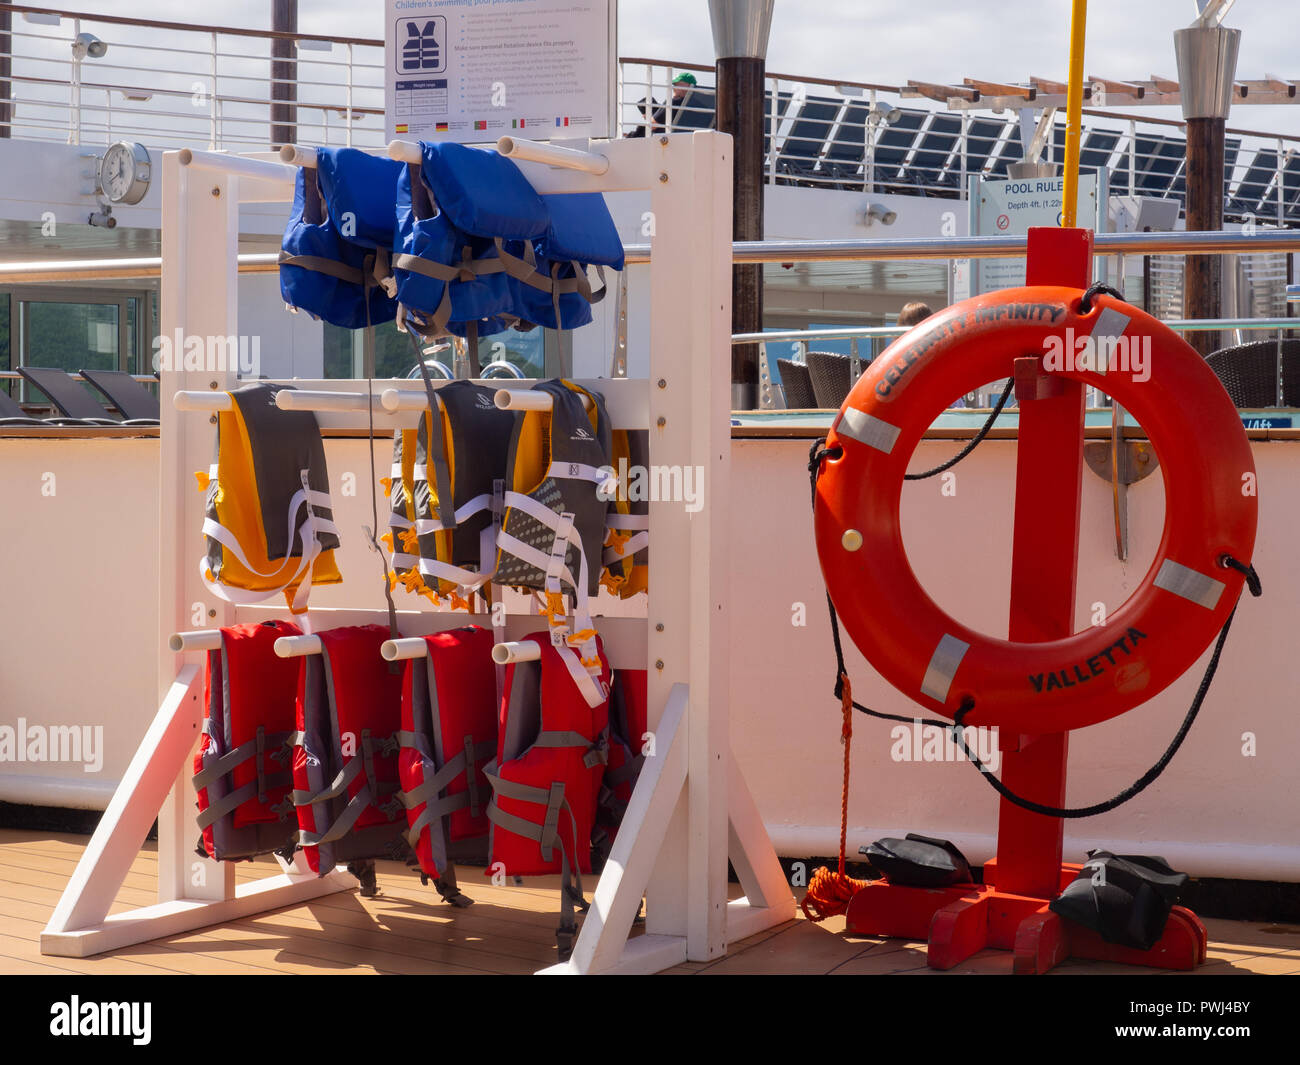 Life Ring And Life Jackets On A Cruise Ship Pool Deck Stock Photo